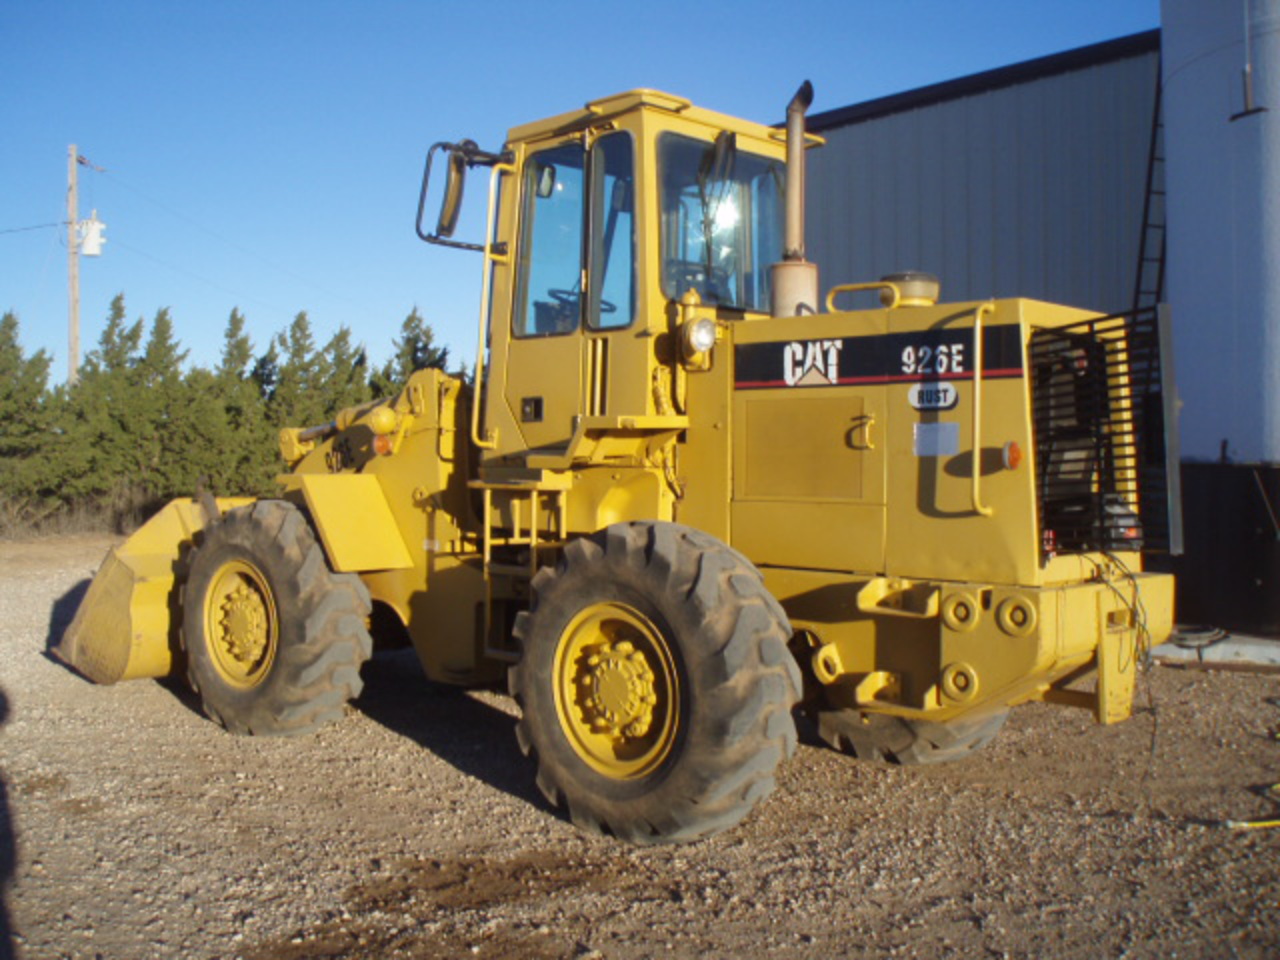 Caterpillar 926 e. Best photos and information of modification.